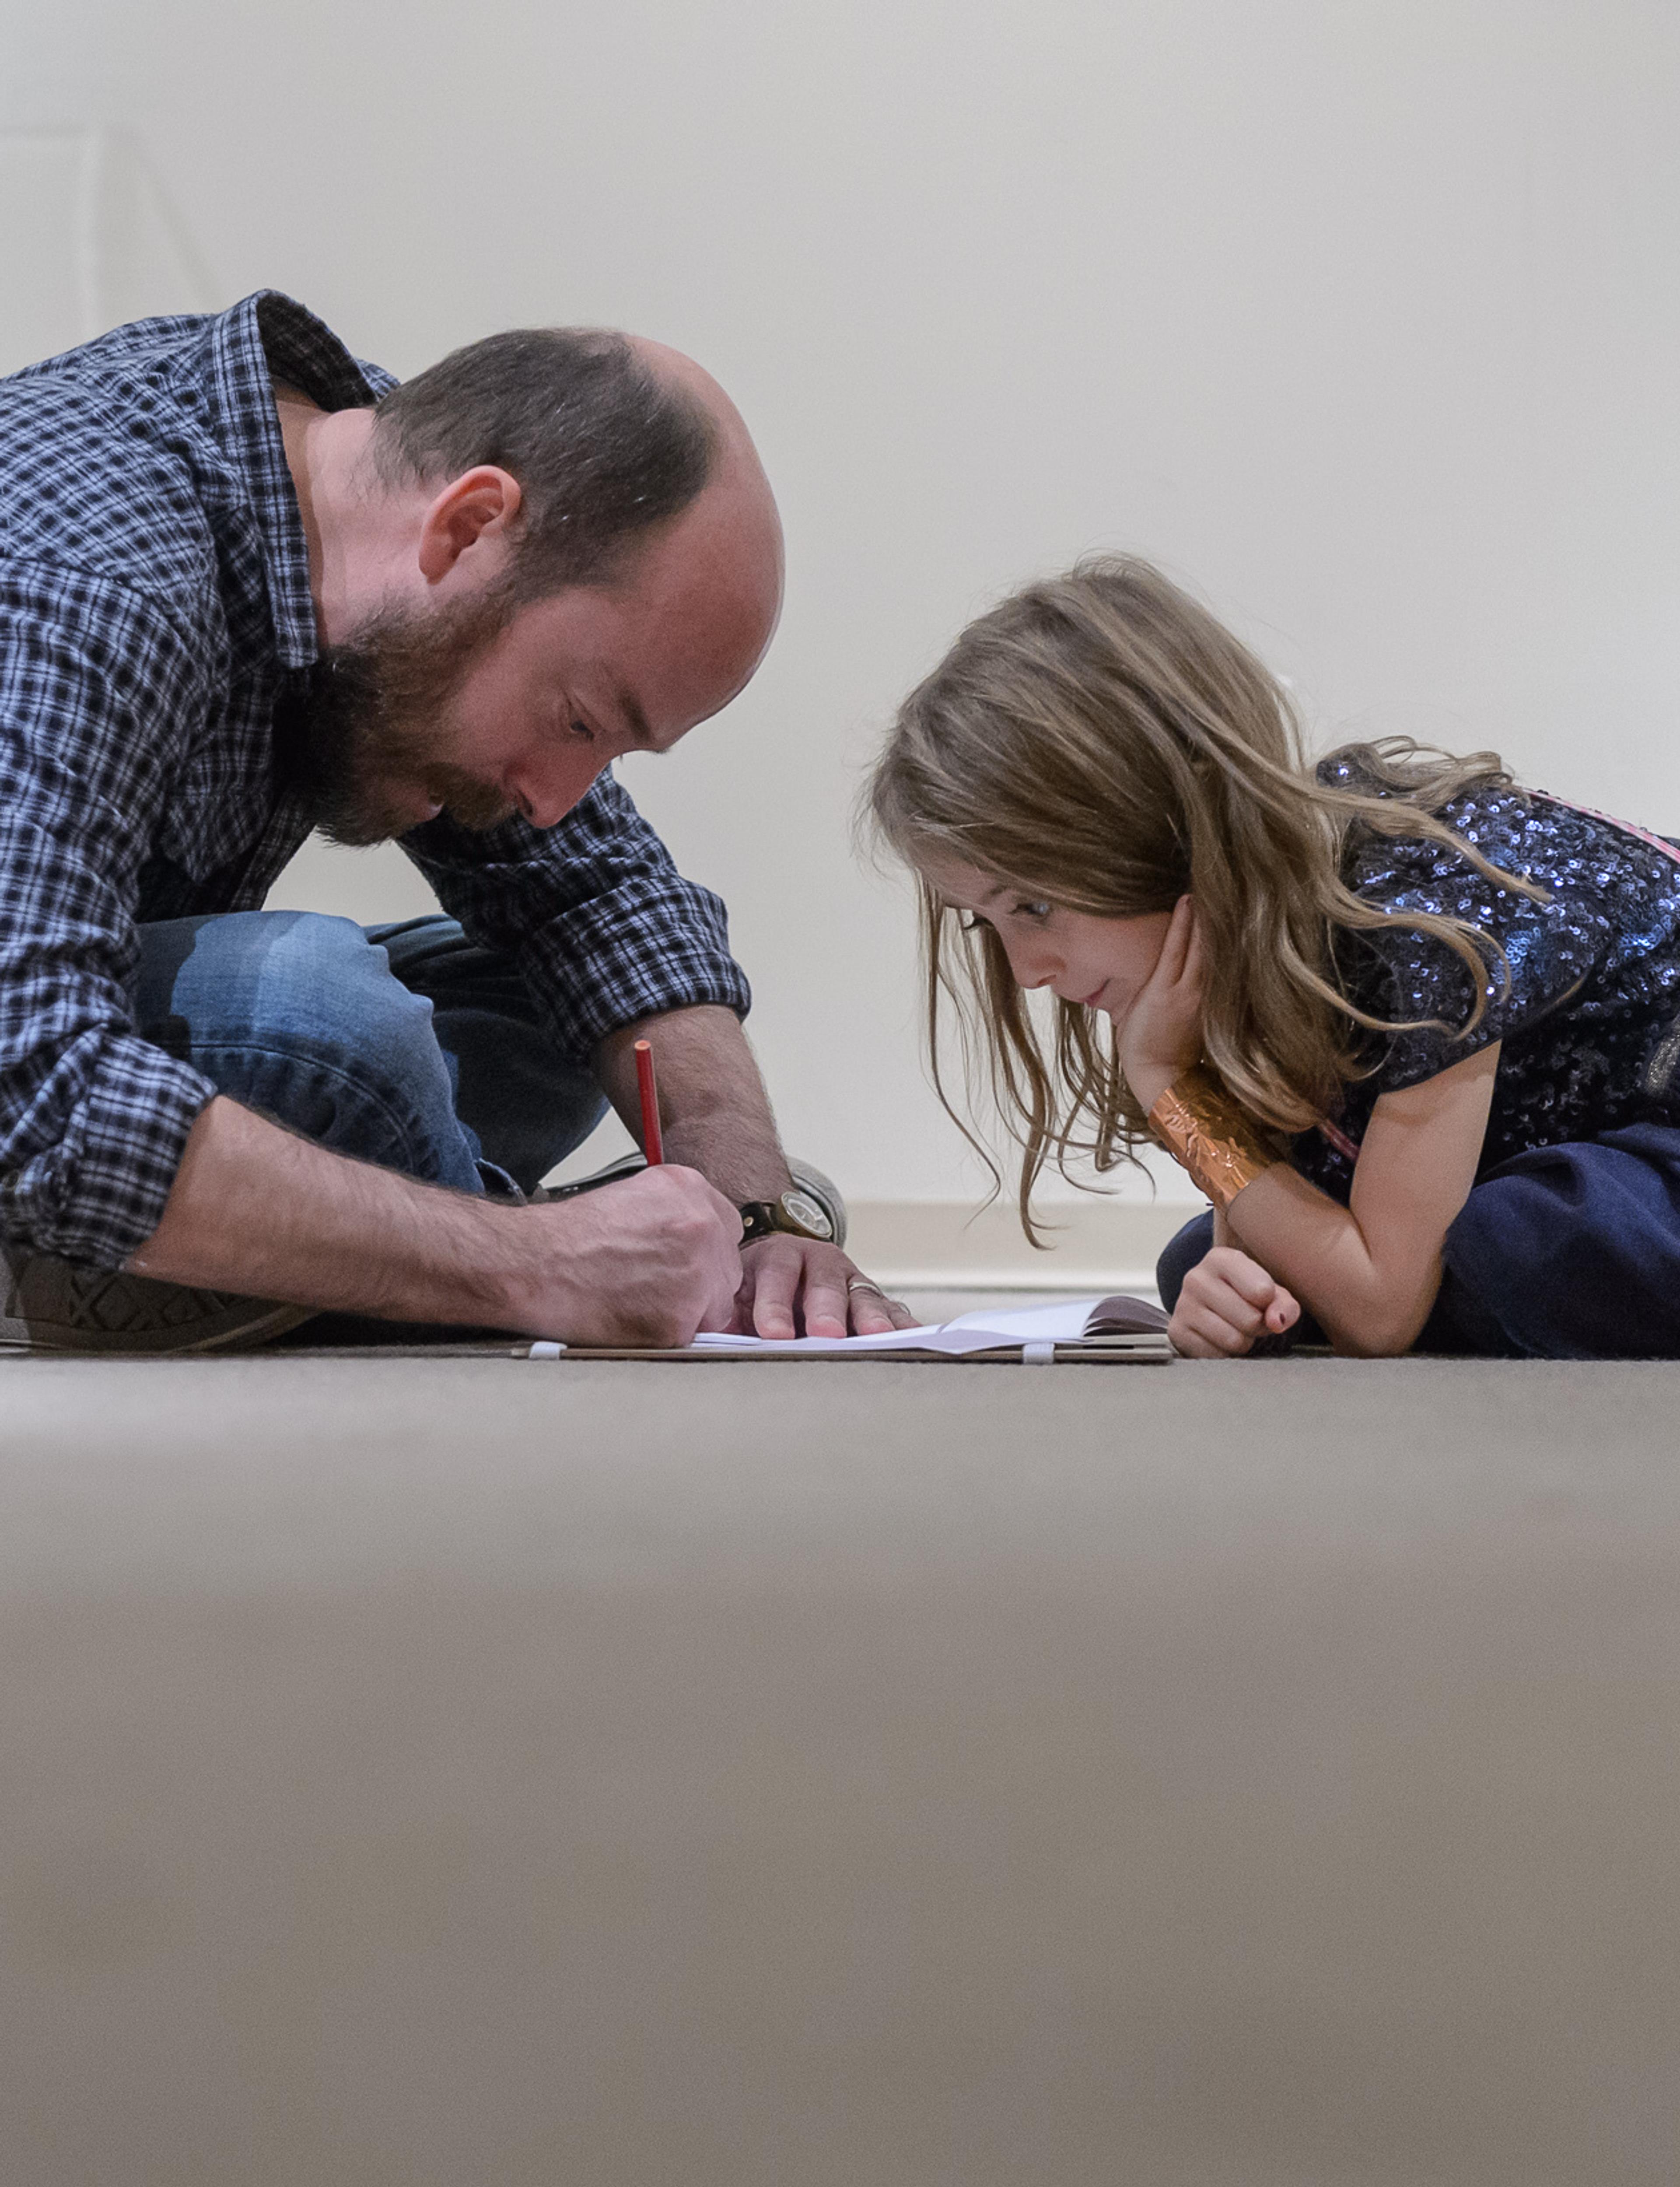 A mid-aged man and a young girl huddle together on the floor engrossed in an activity together.